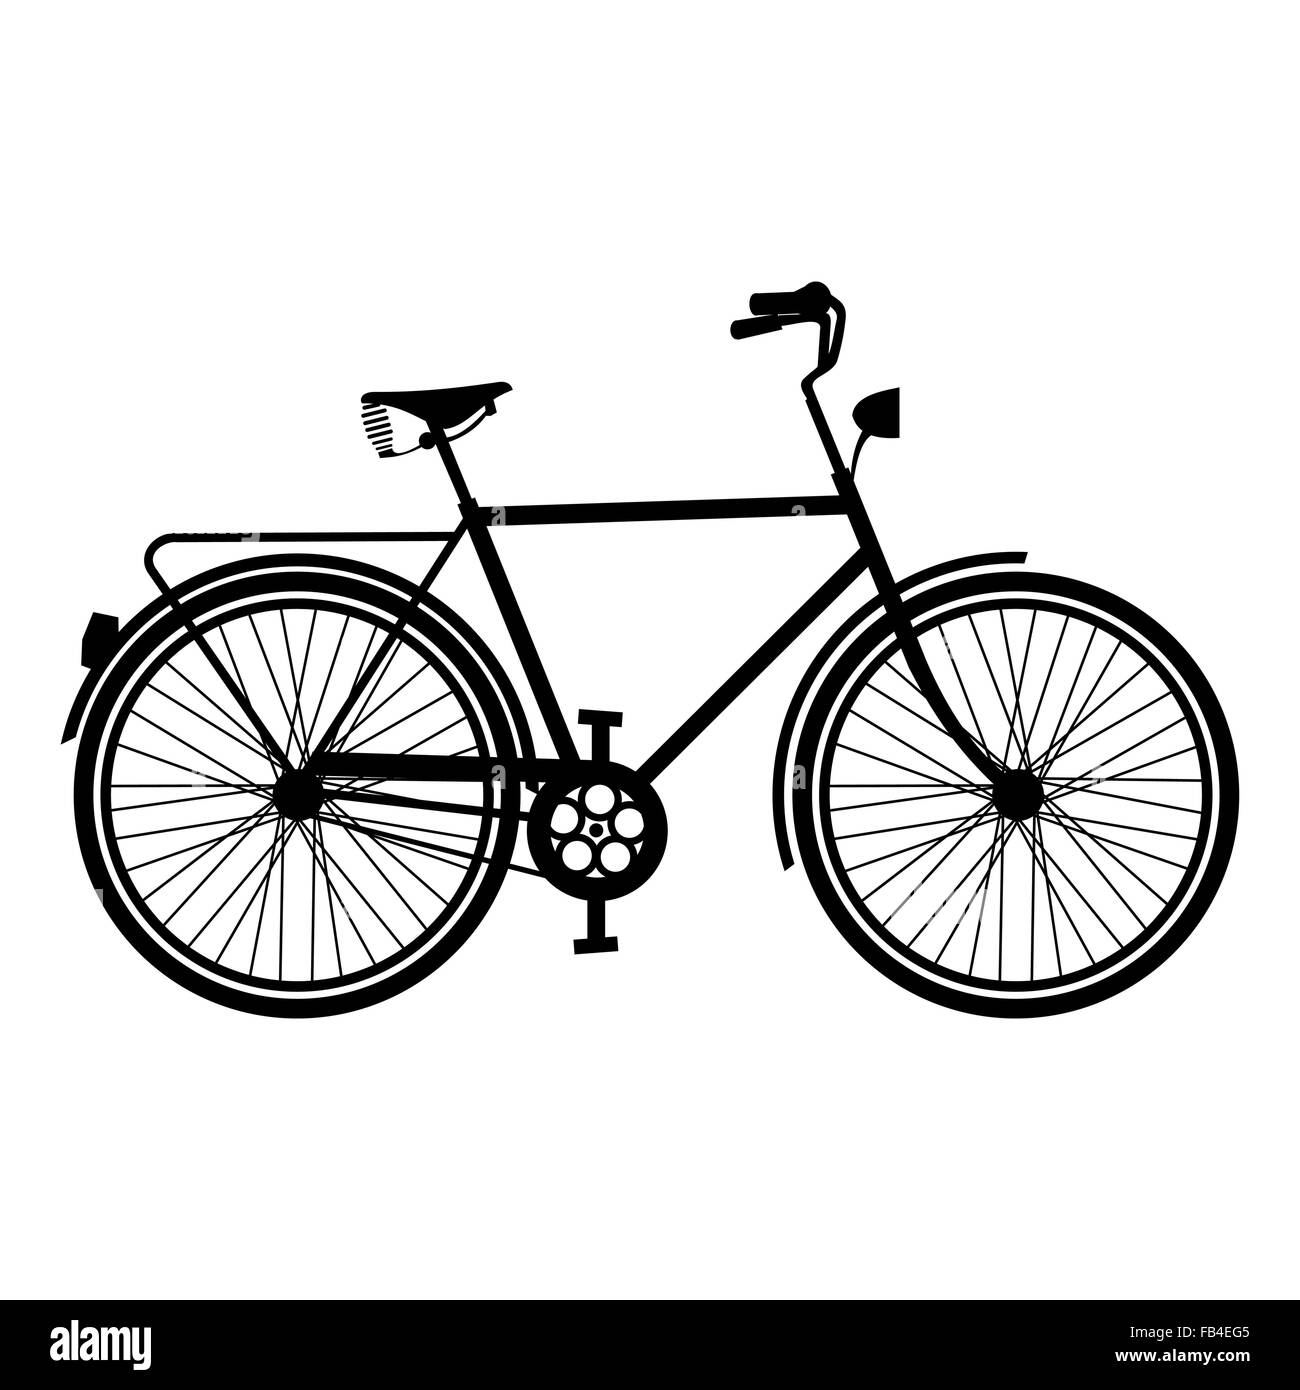 Retro bike silhouette concept, isolated bicycle outline on white background. EPS10 vector. Stock Vector